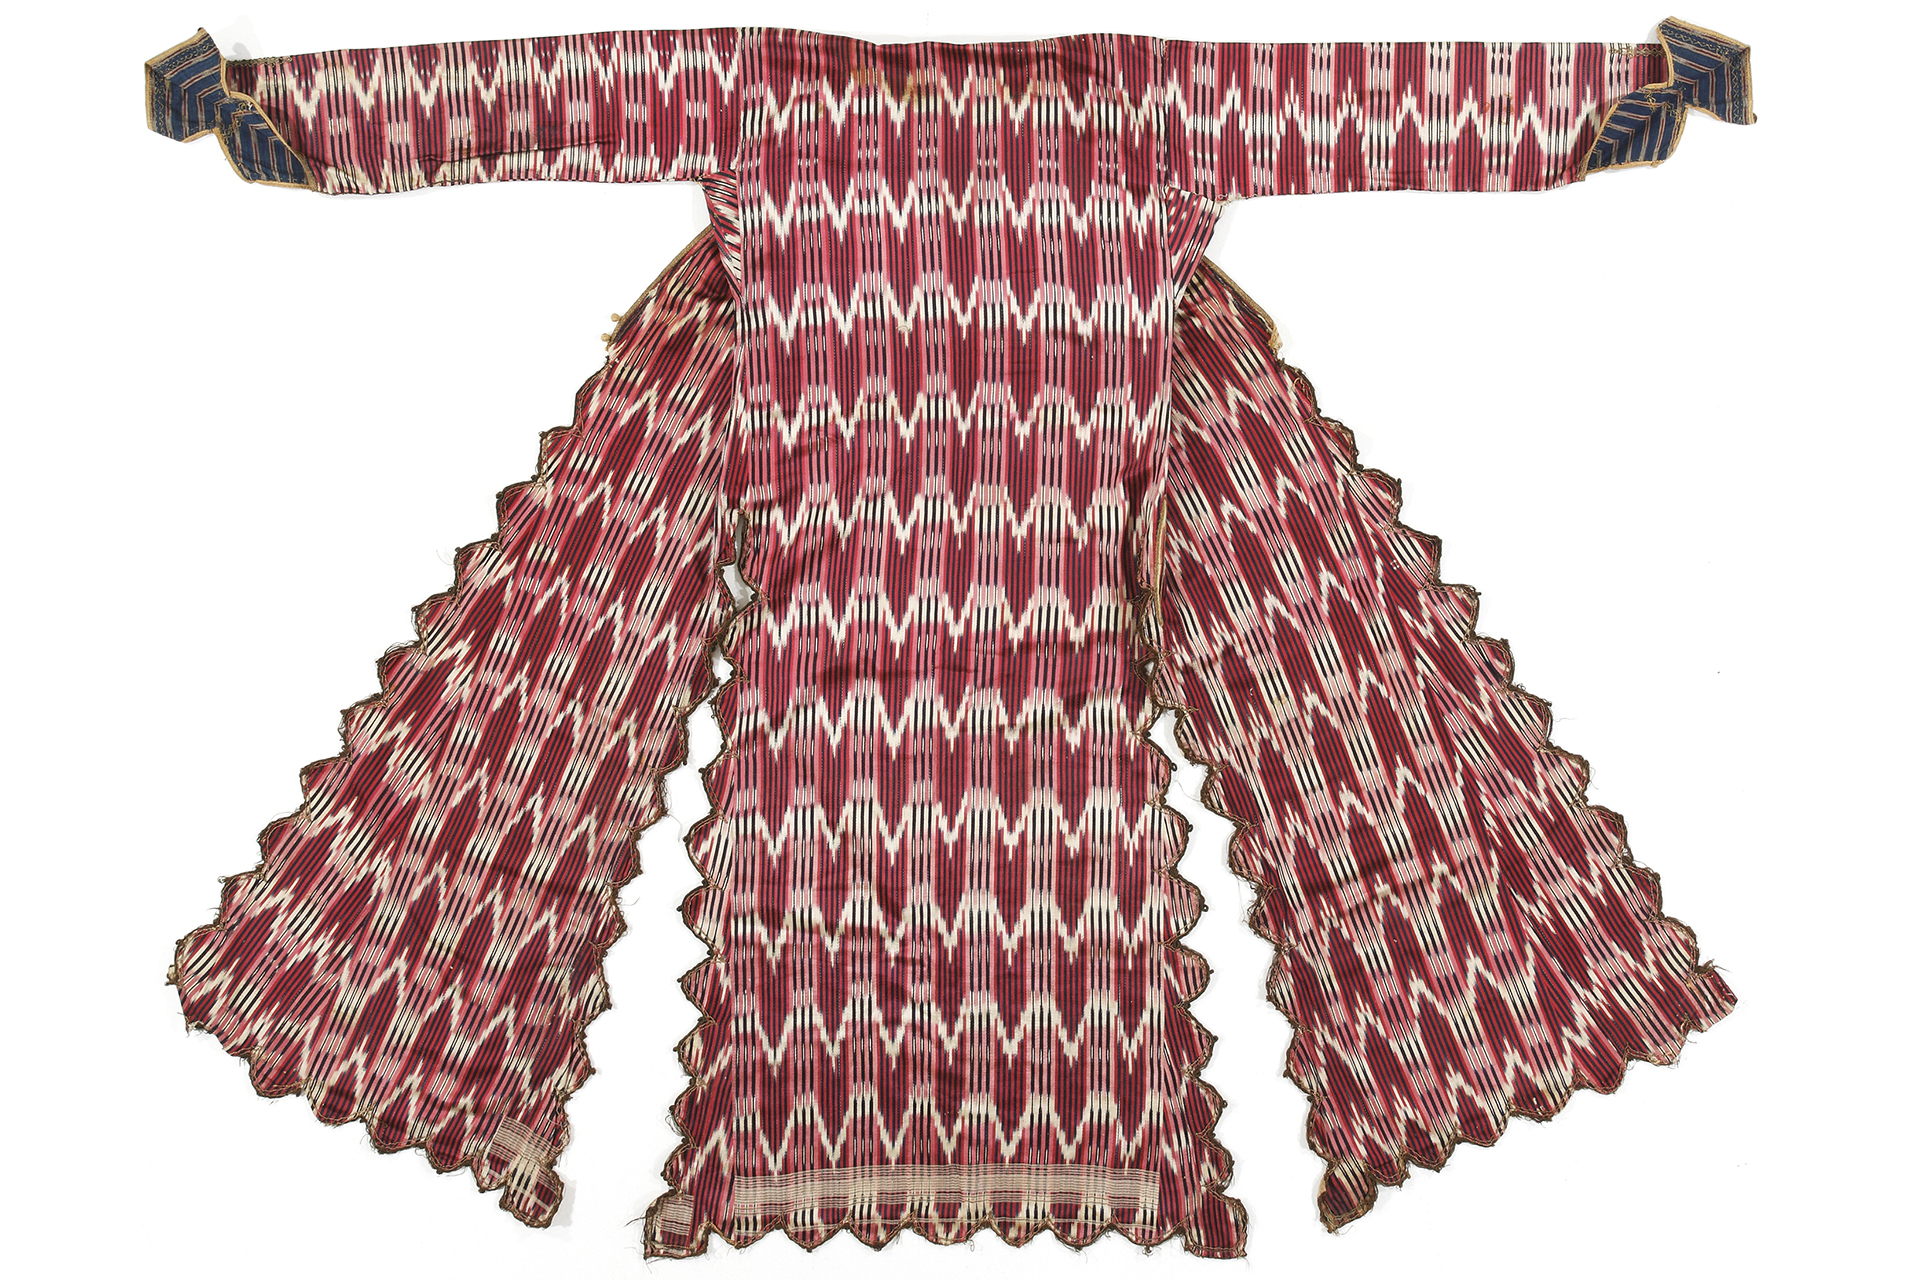 A red-and-white ikat robe spread flat